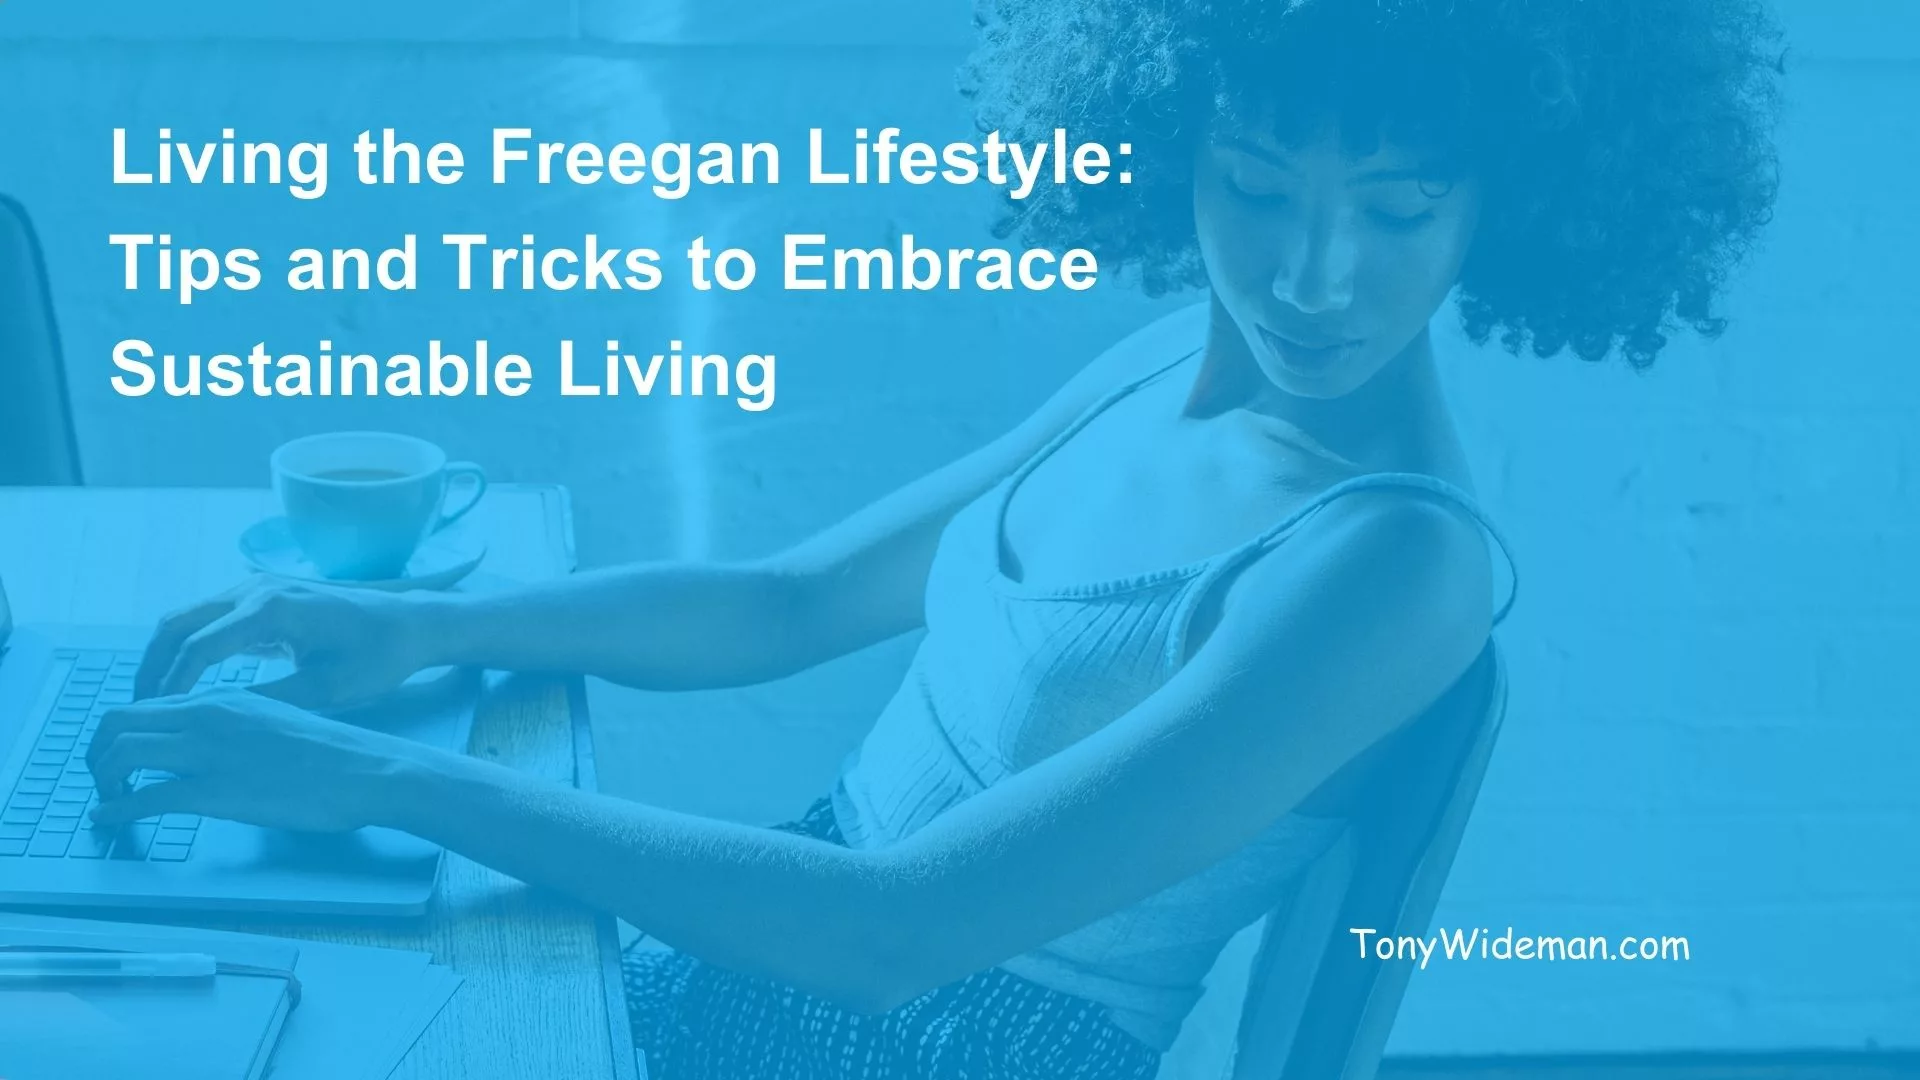 Living Freegan Lifestyle: Tips and Tricks to Embrace Sustainable Living